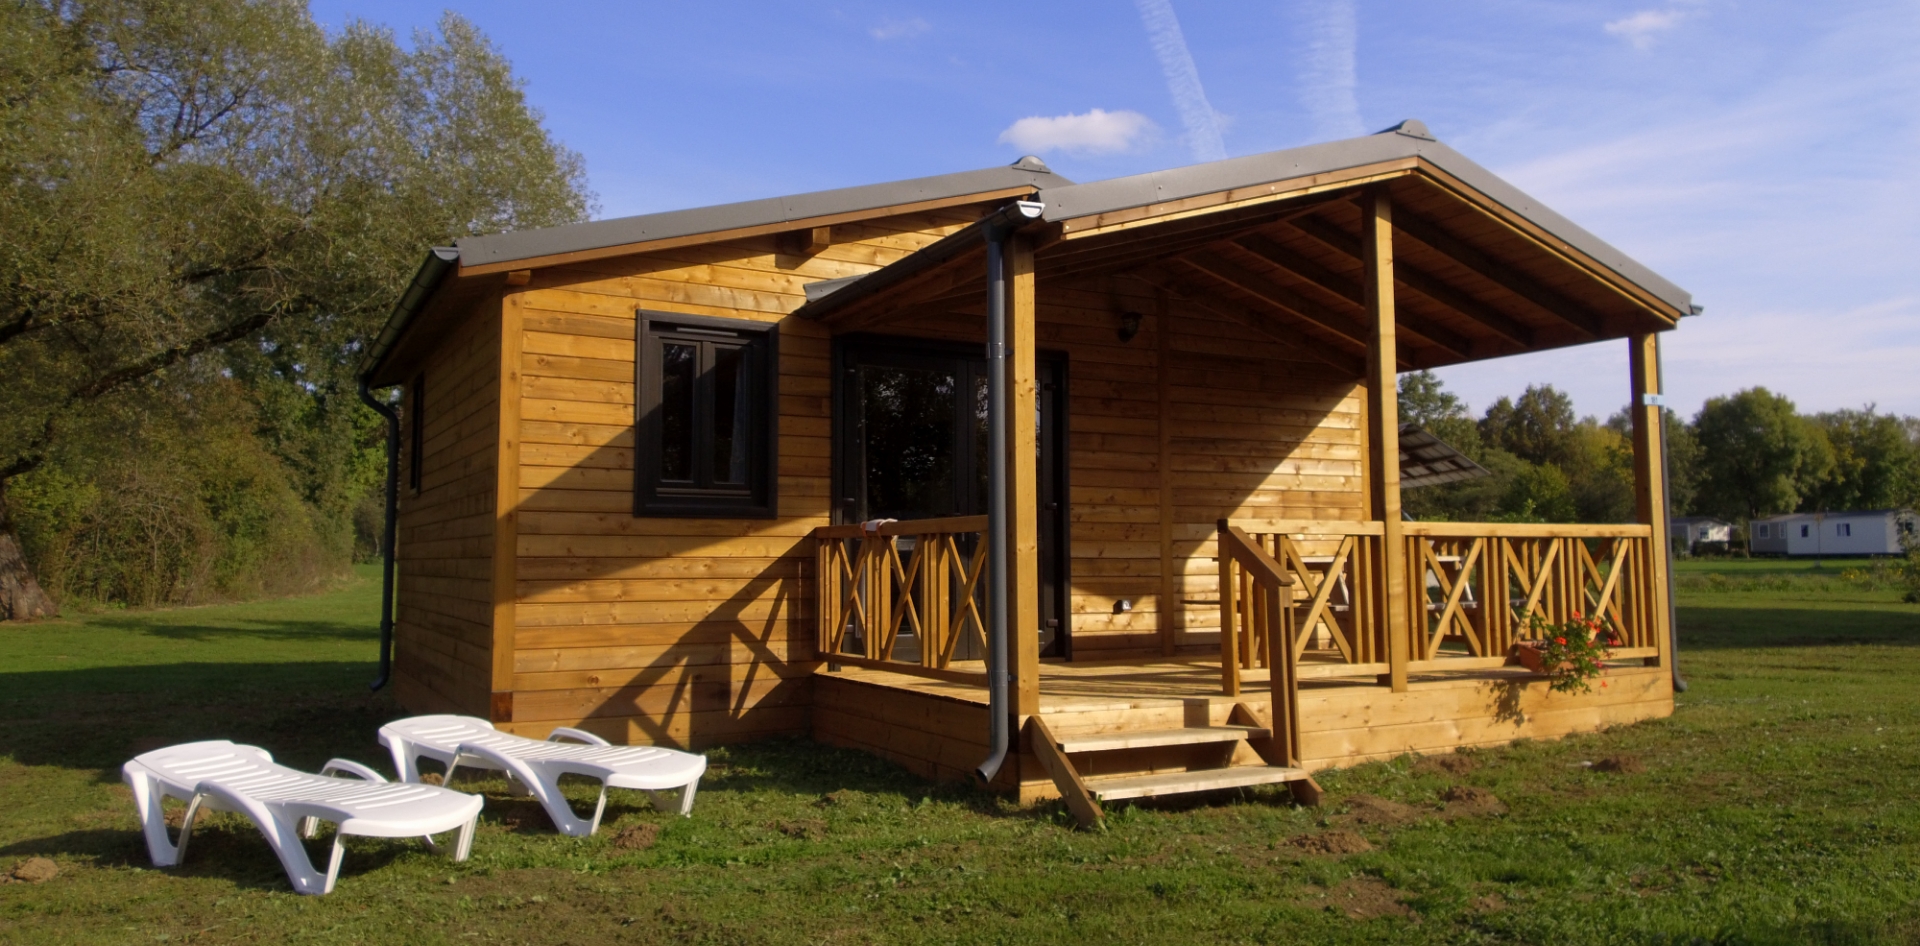 View of the Savania Chalet with covered wood terrace to rent at Les Bords de Loue campsite in Jura